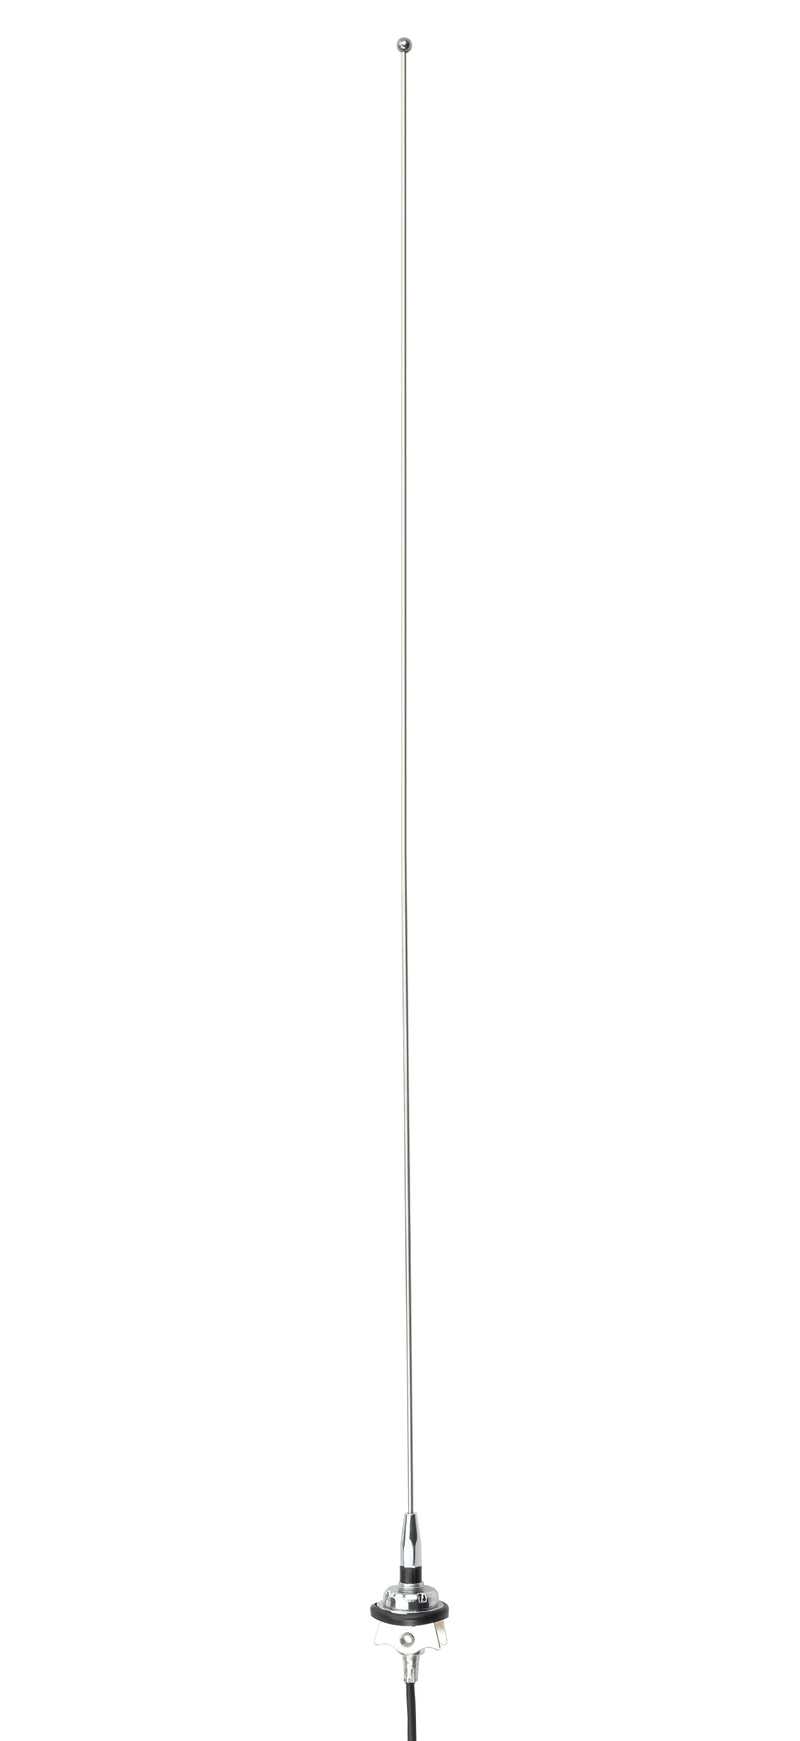 1987-89 Chrysler Conquest Replacement Antenna